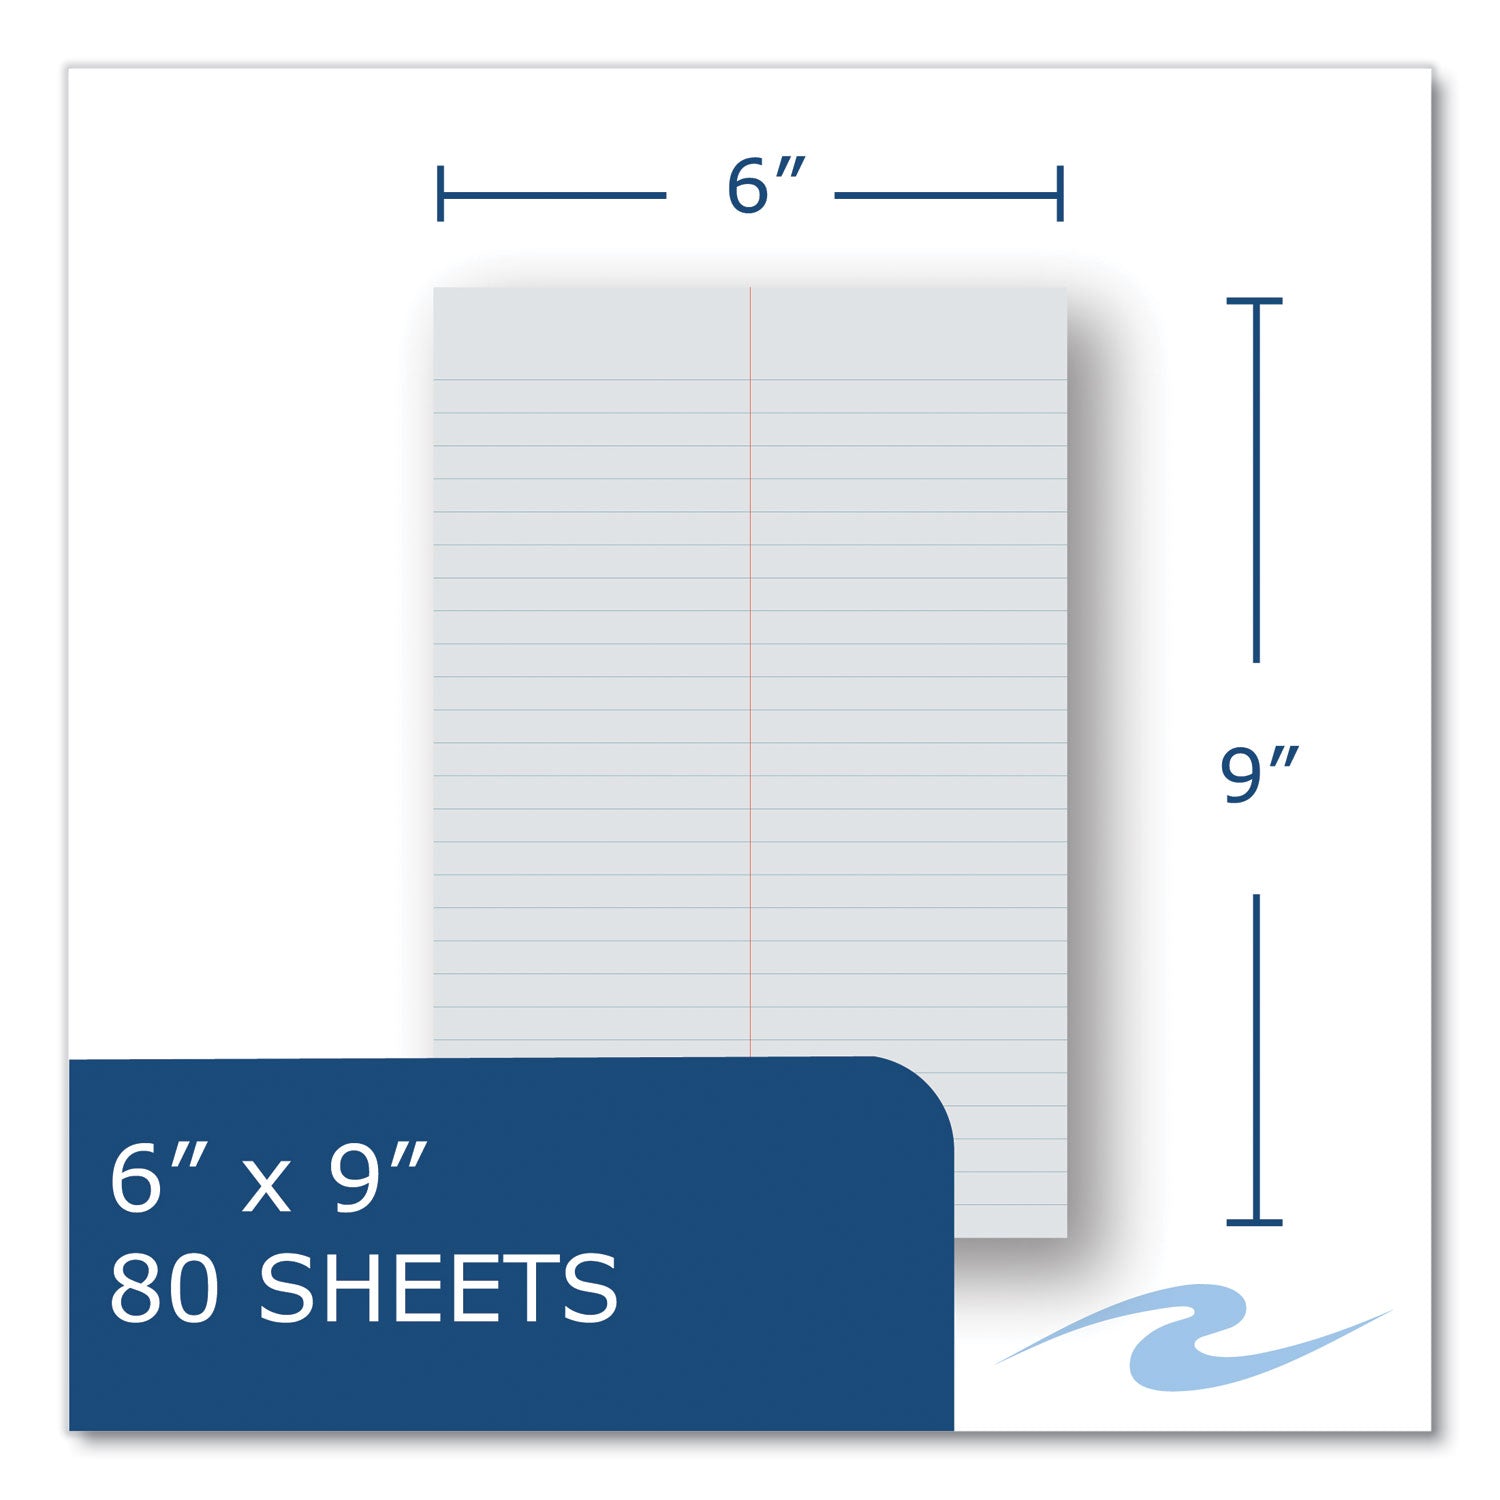 enviroshades-steno-pad-gregg-rule-white-cover-80-assorted-color-6-x-9-sheets-24-pads-carton-ships-in-4-6-business-days_roa12354cs - 7